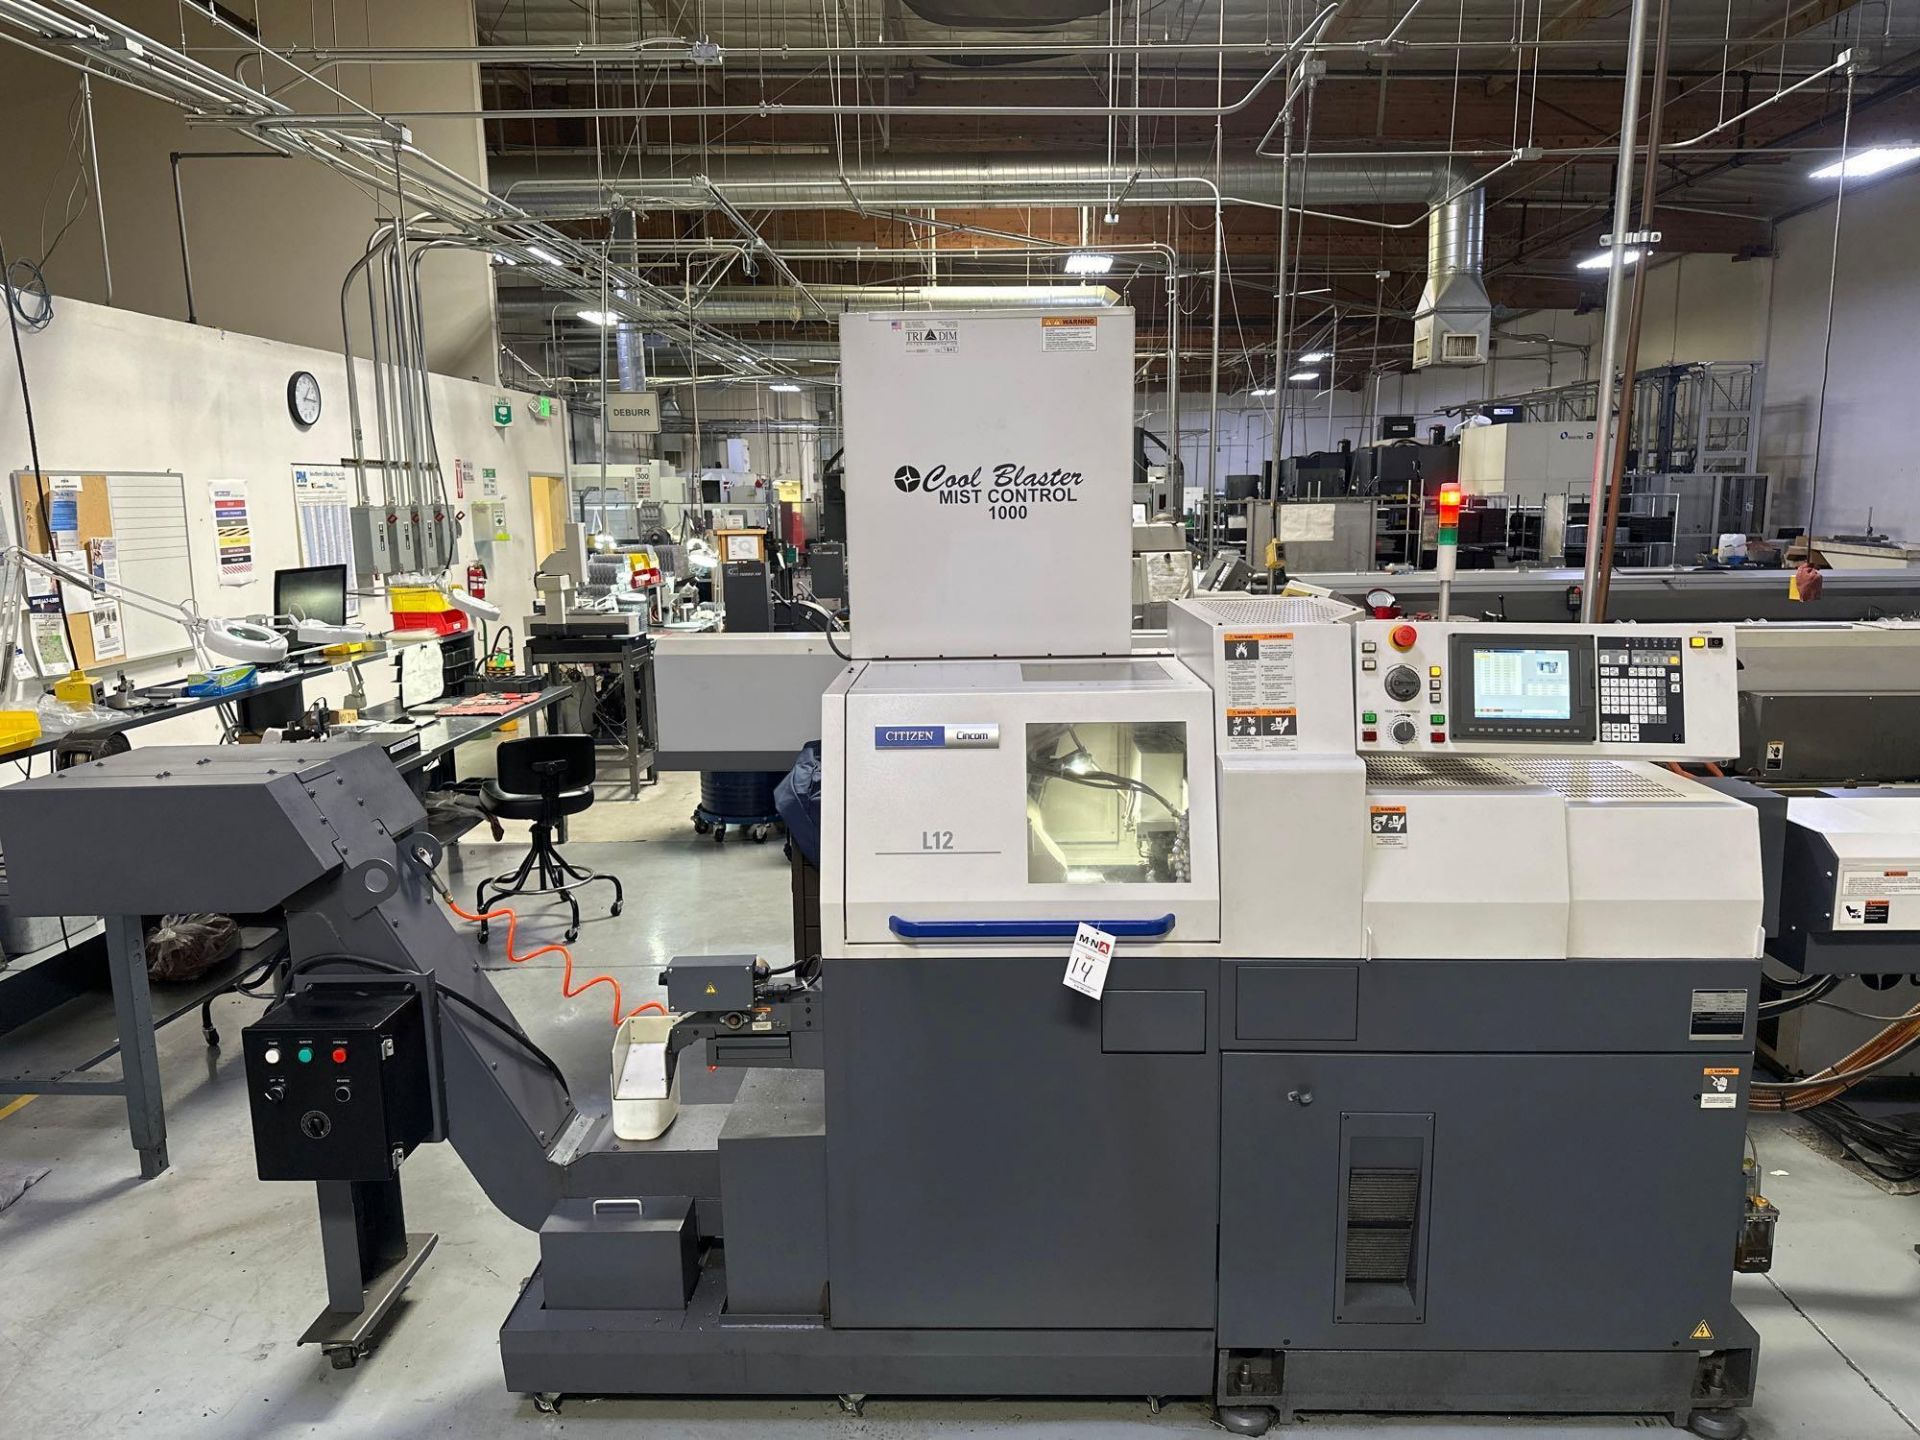 Citizen L12-1M7 6-Axis Swiss CNC Lathe, 18 Station Tool Holders *Delayed for sale in July* - Image 2 of 14